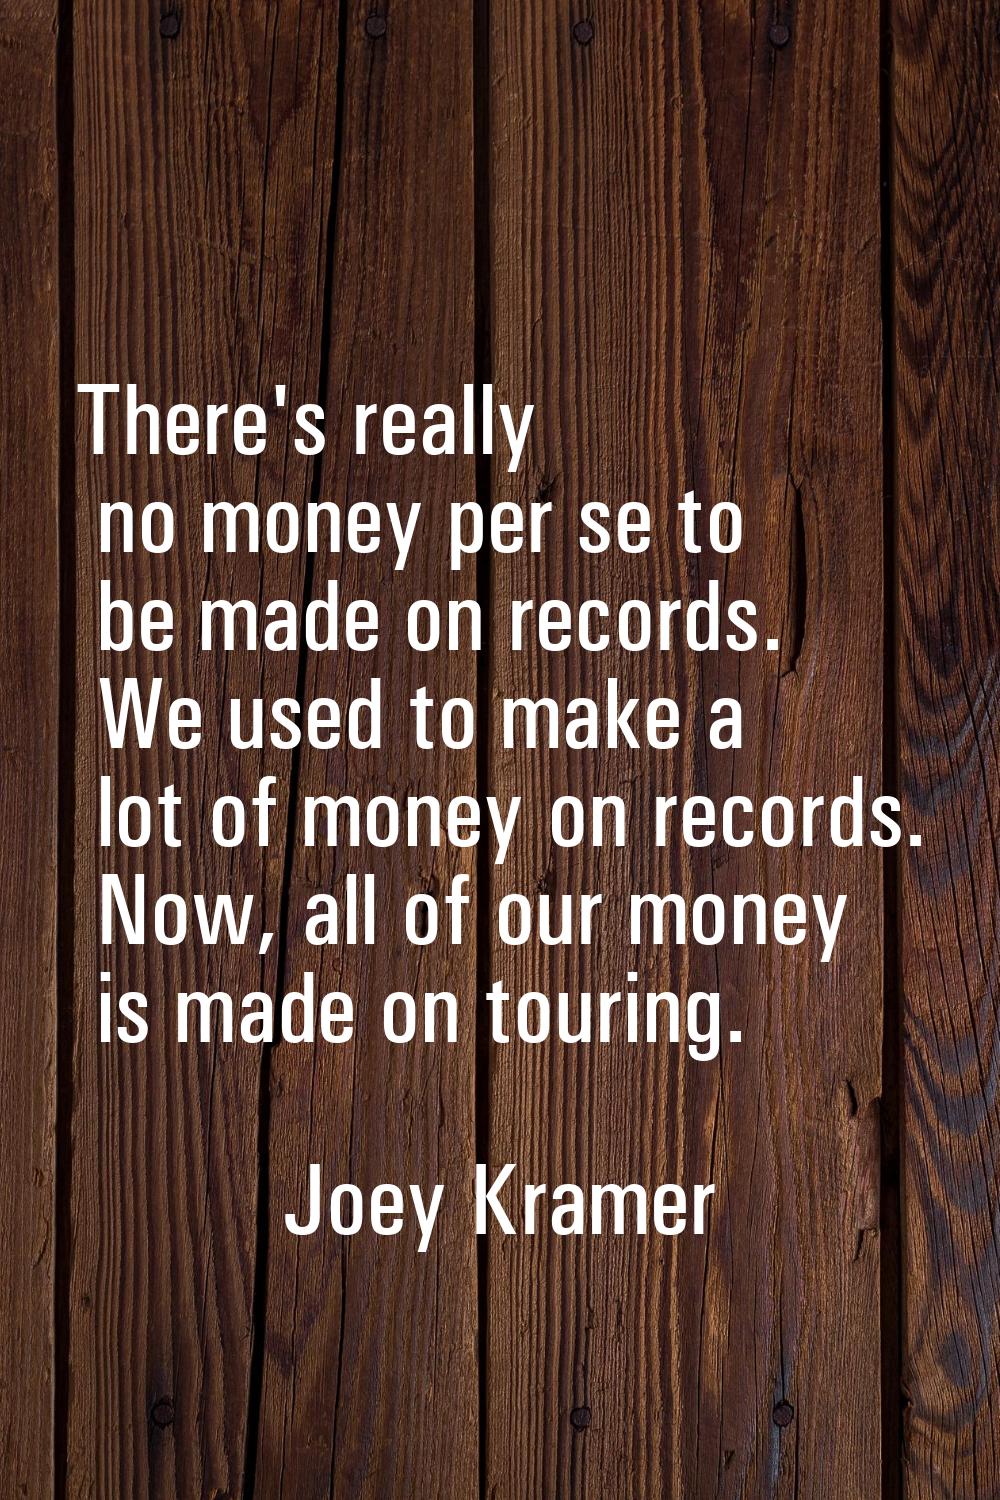 There's really no money per se to be made on records. We used to make a lot of money on records. No